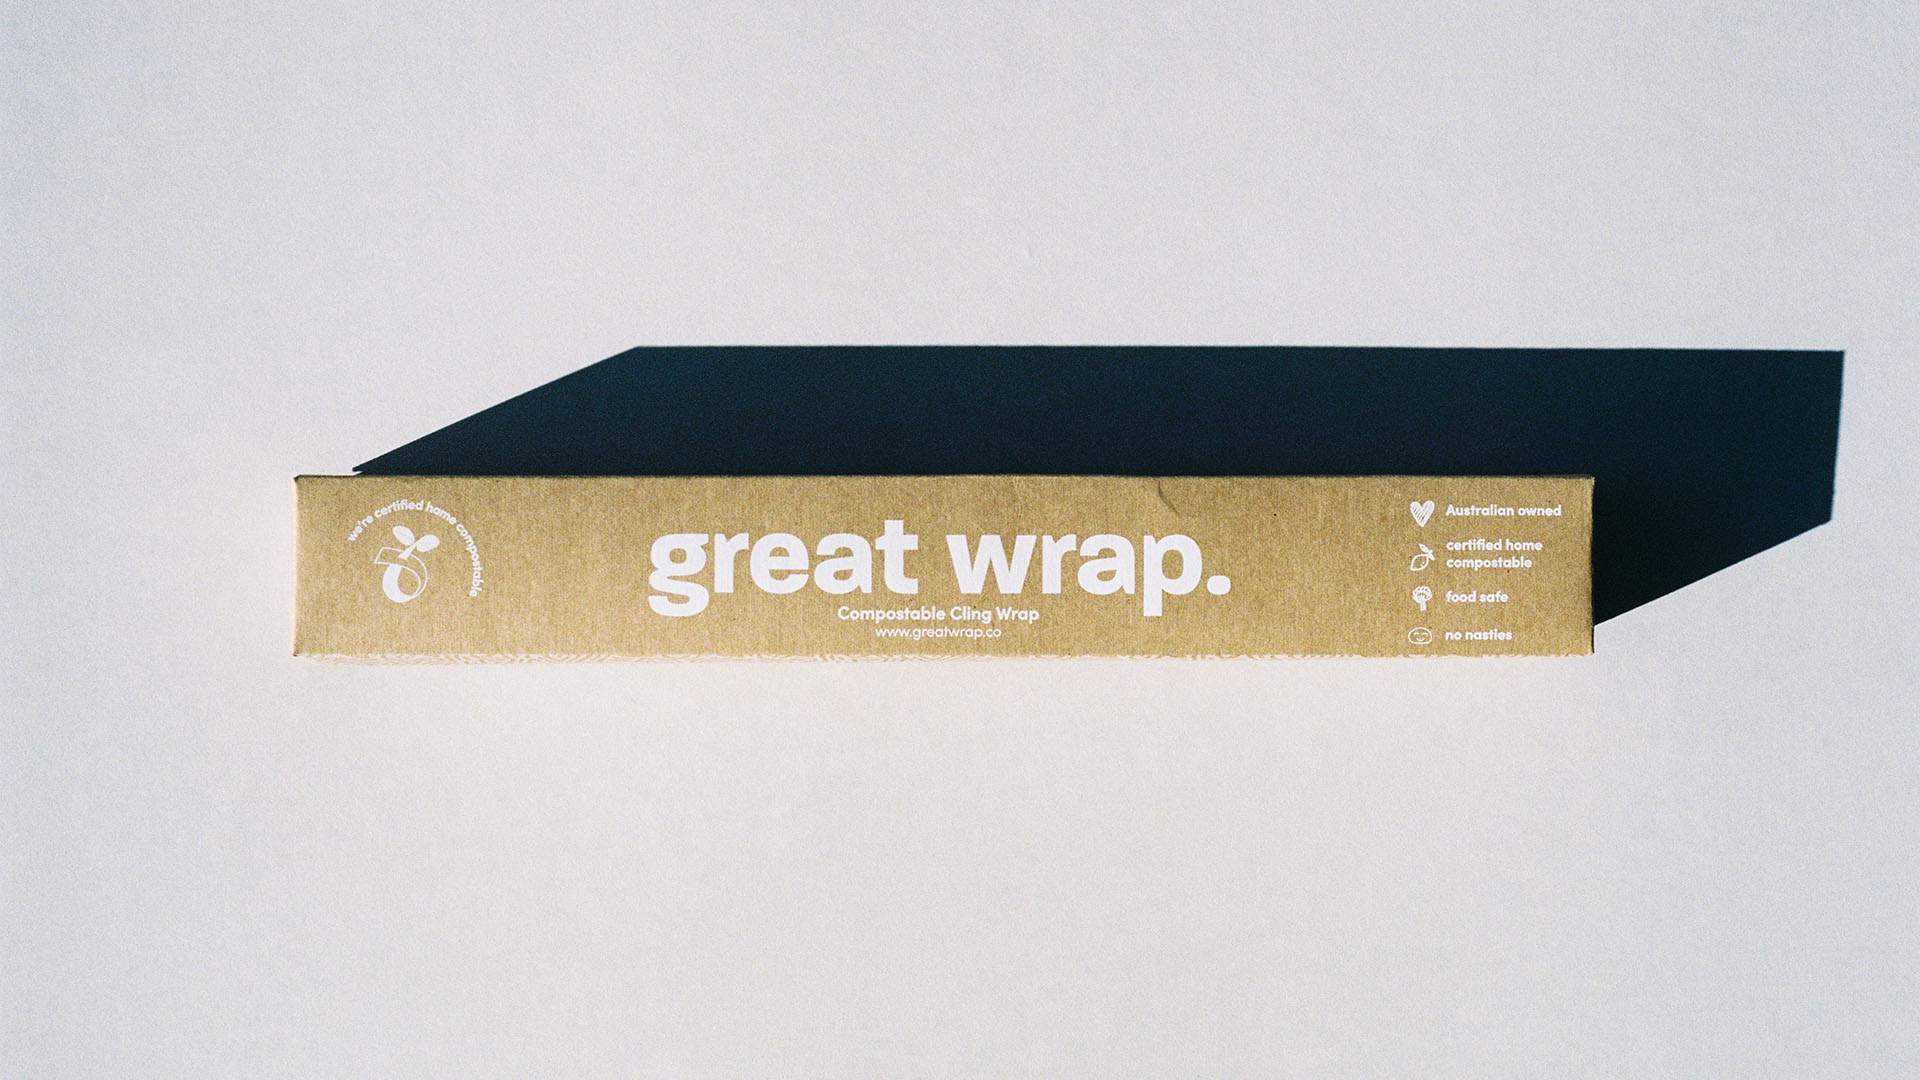 Great Wrap Is the New Alternative to Cling Wrap You Can Throw In Your Compost Bin